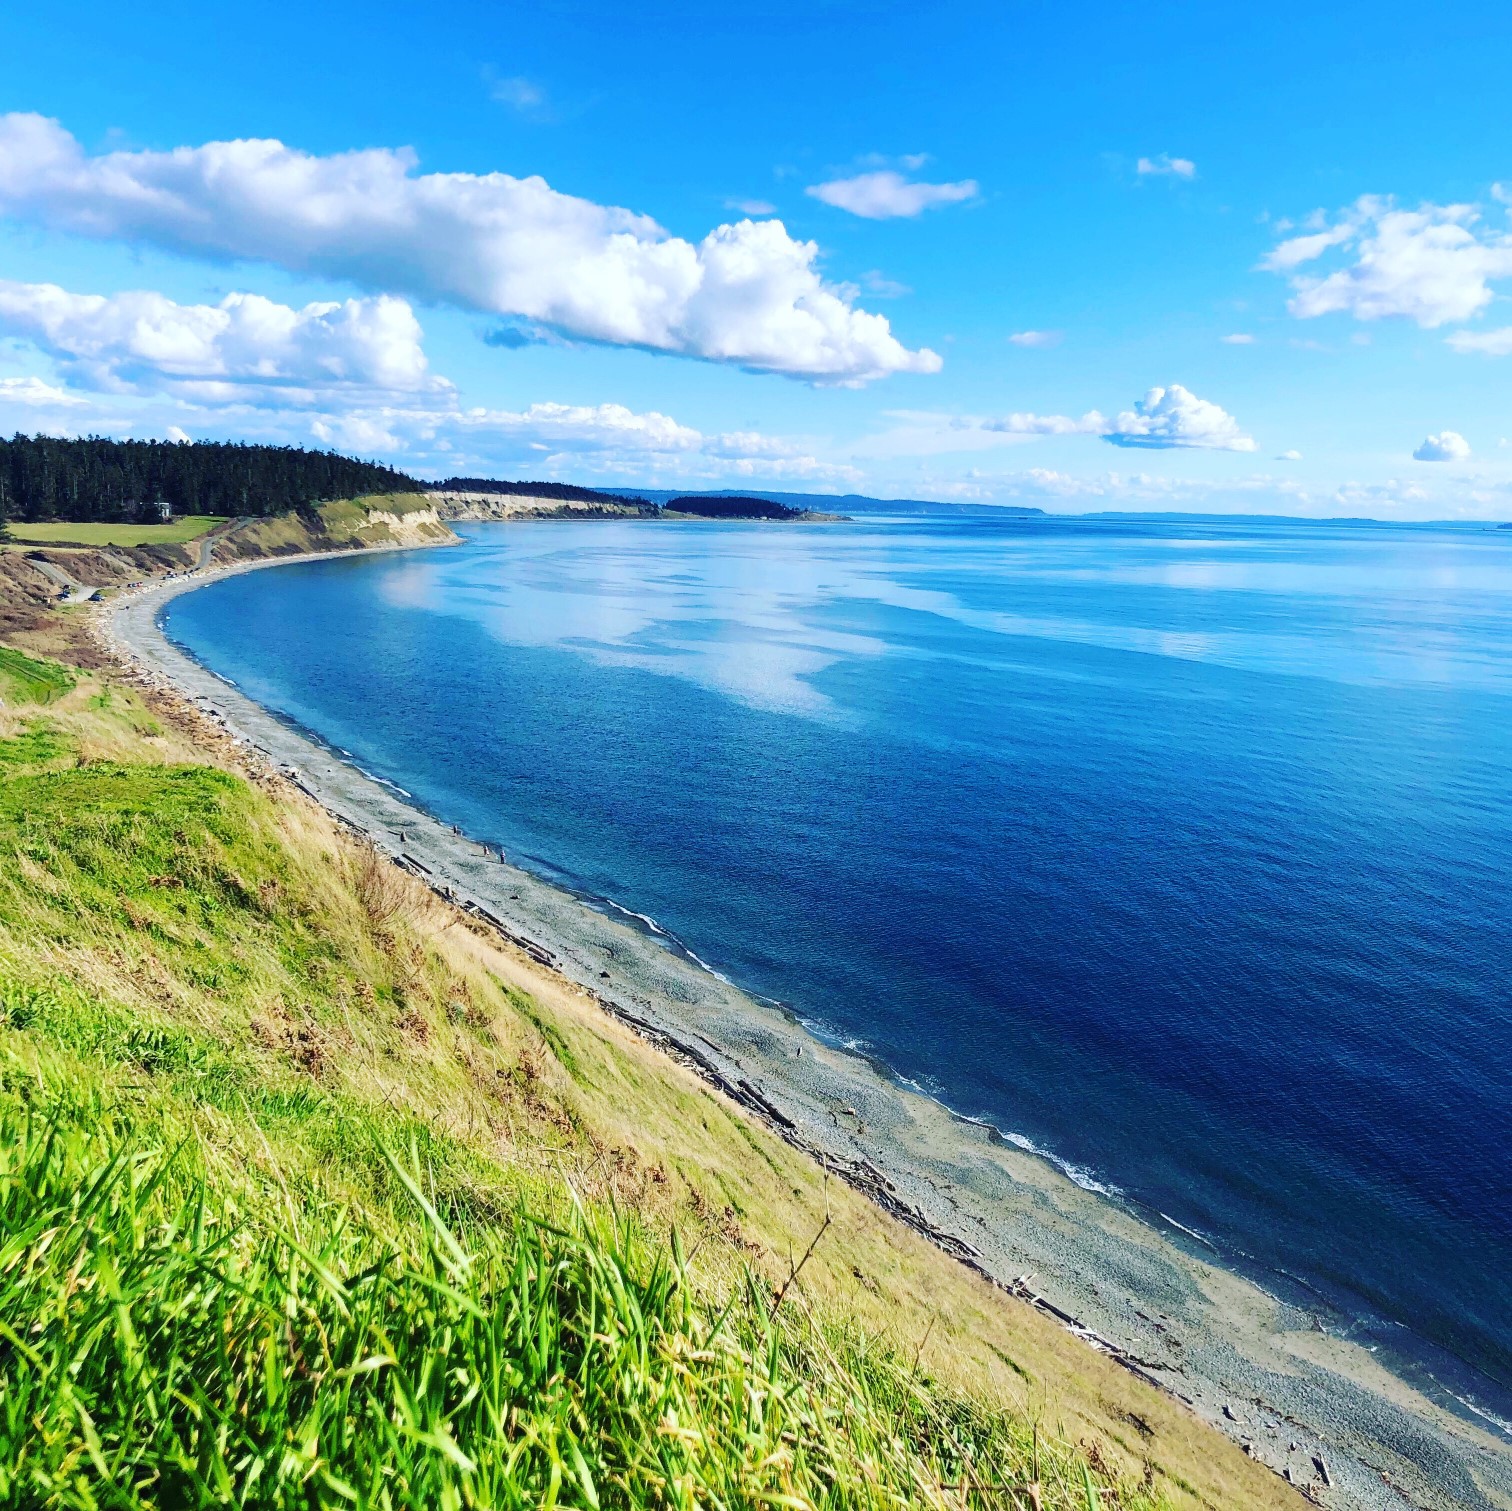 Ebey's landing, Windermere, Clouds, Blue Water, Bluff 